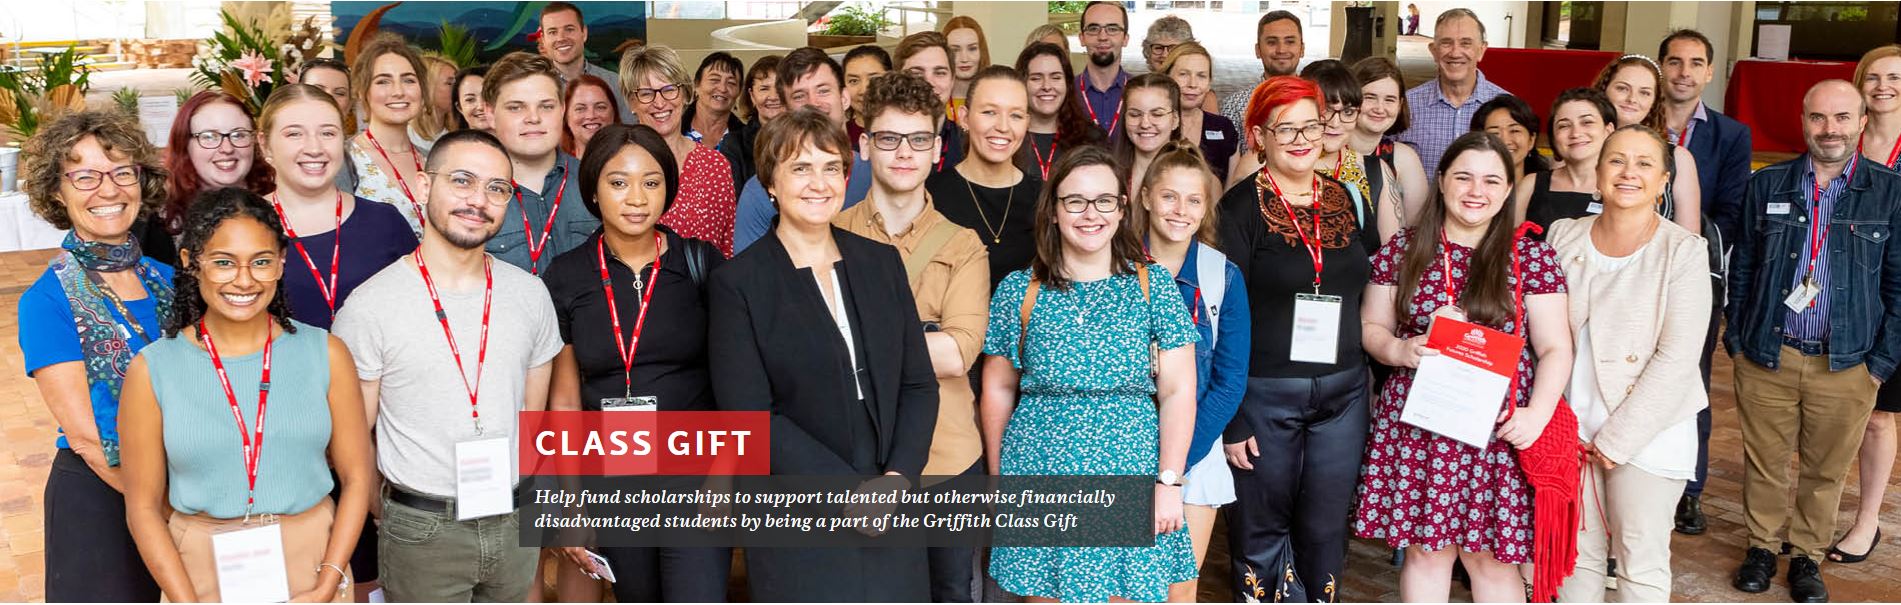 2024 Class Gift: Help fund scholarships to support talented but otherwise financially disadvantaged students by being a part of the Griffith Class Gift.